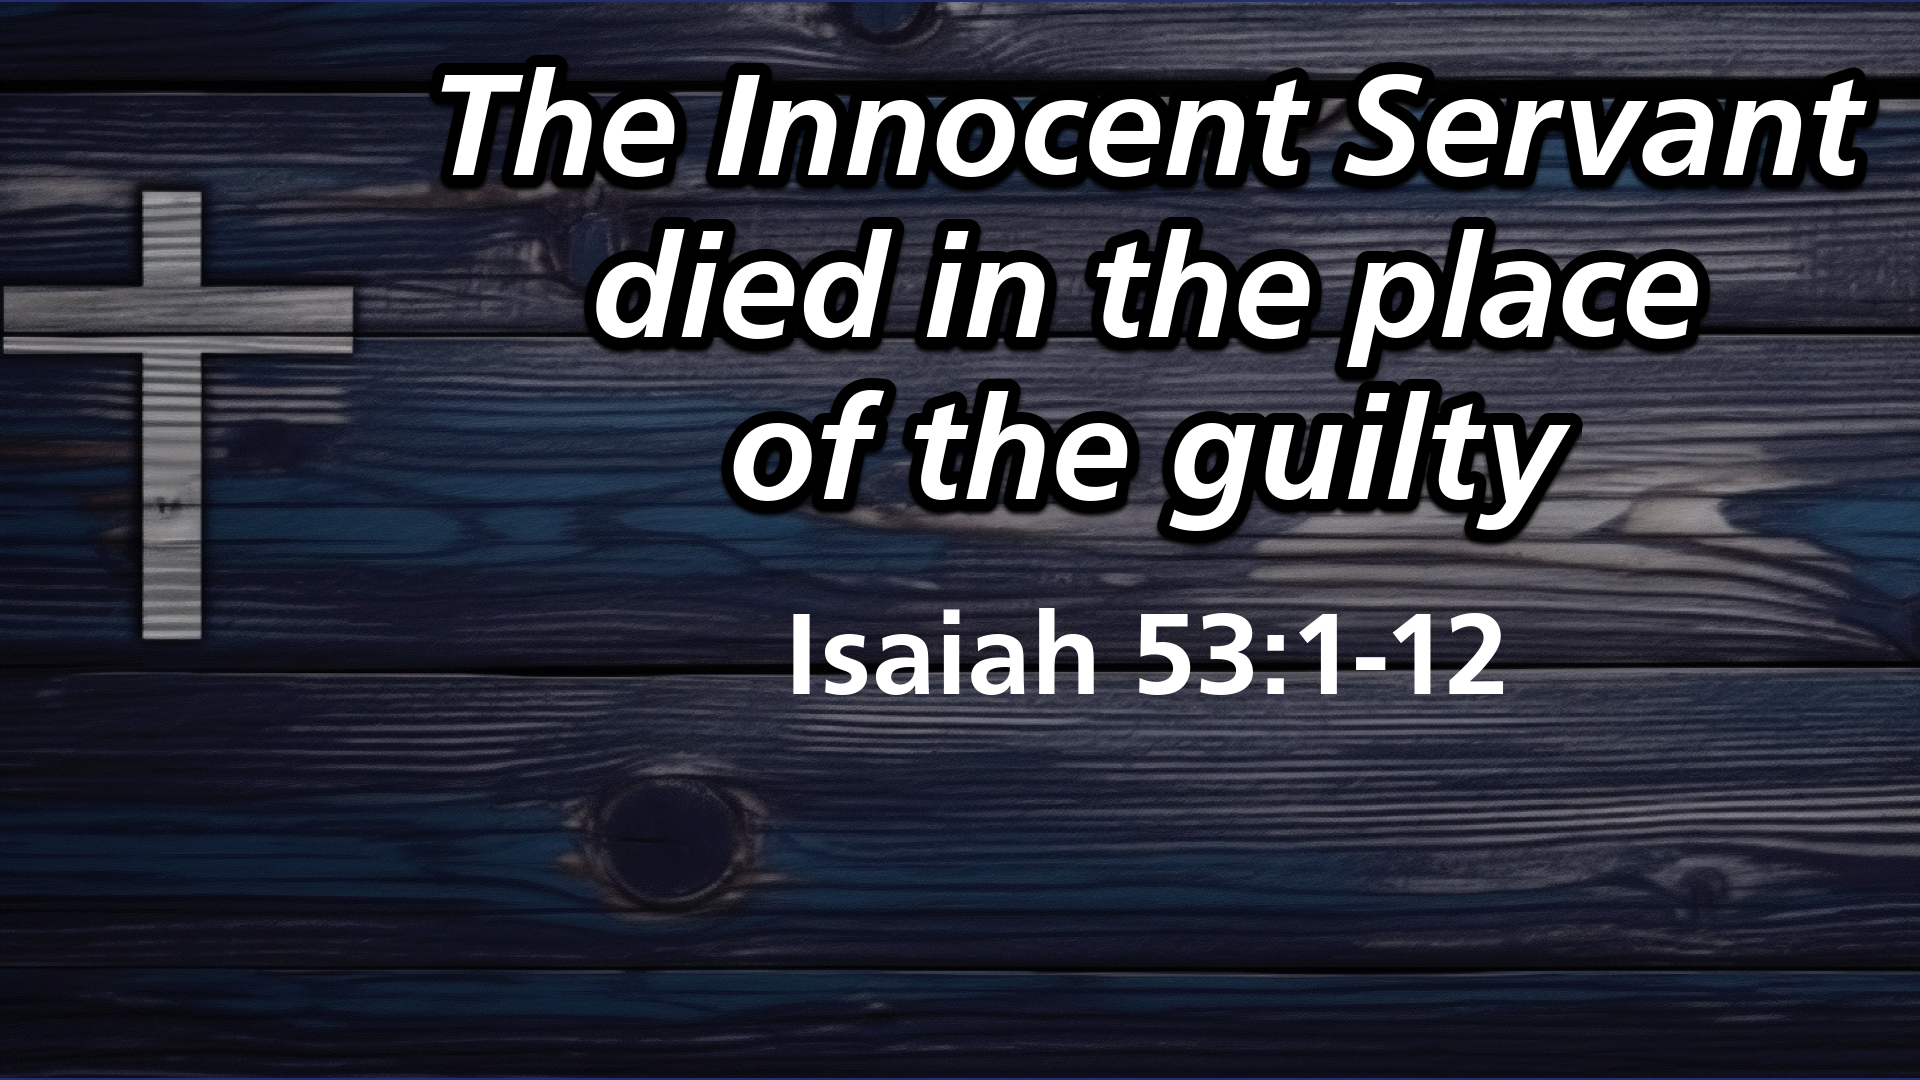 "The Innocent Servant Died in the Place of the Guilty"